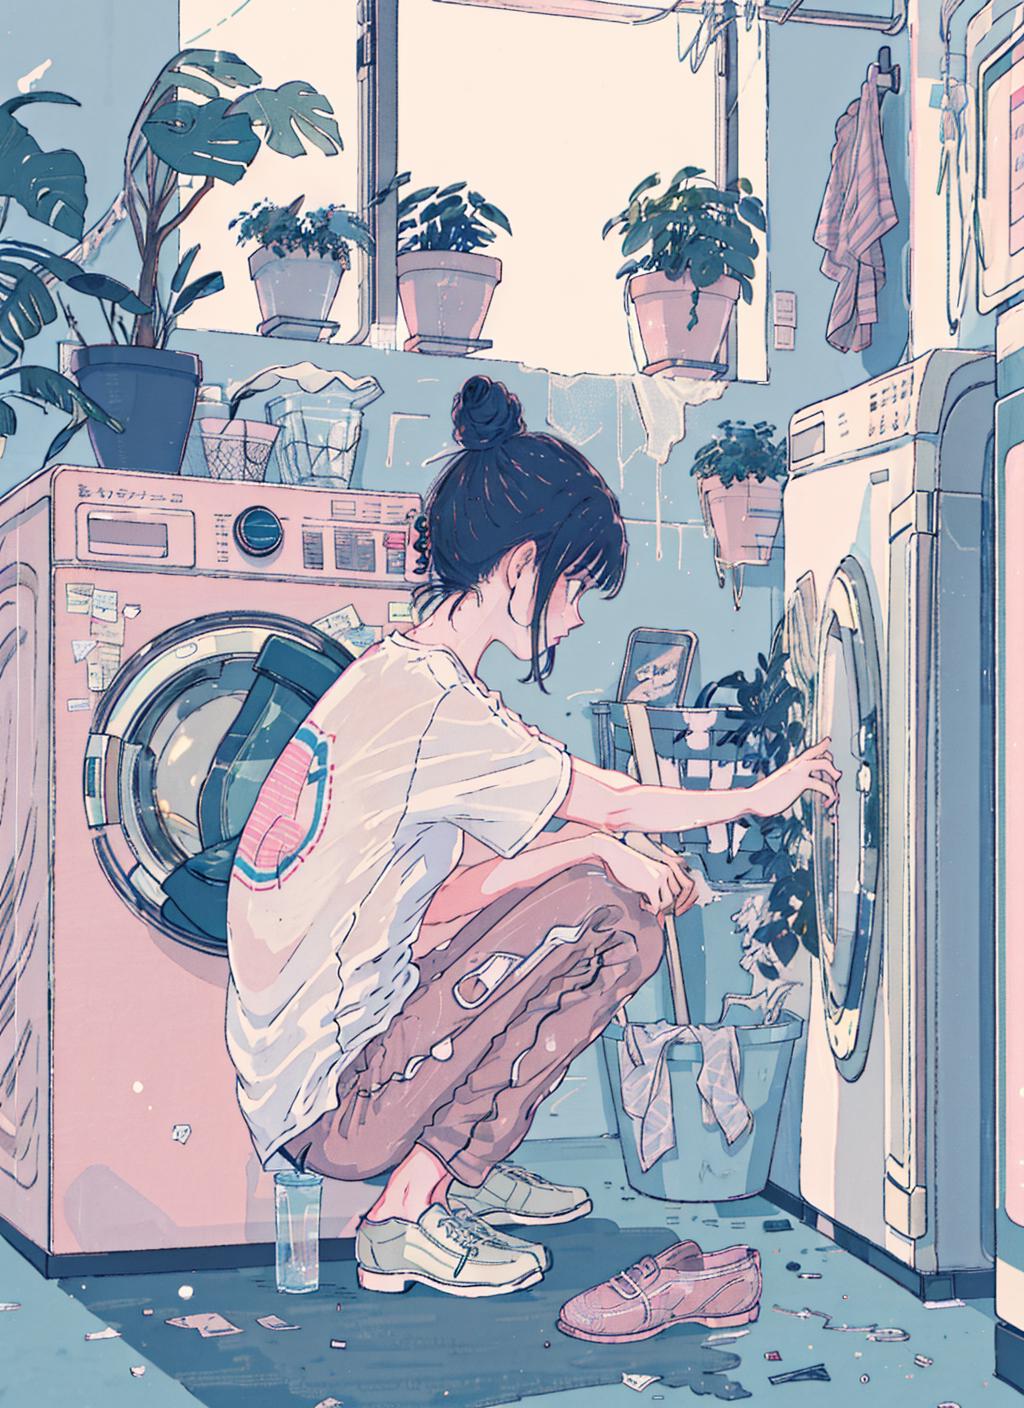 A woman in a pink shirt is kneeling down in front of a washing machine.